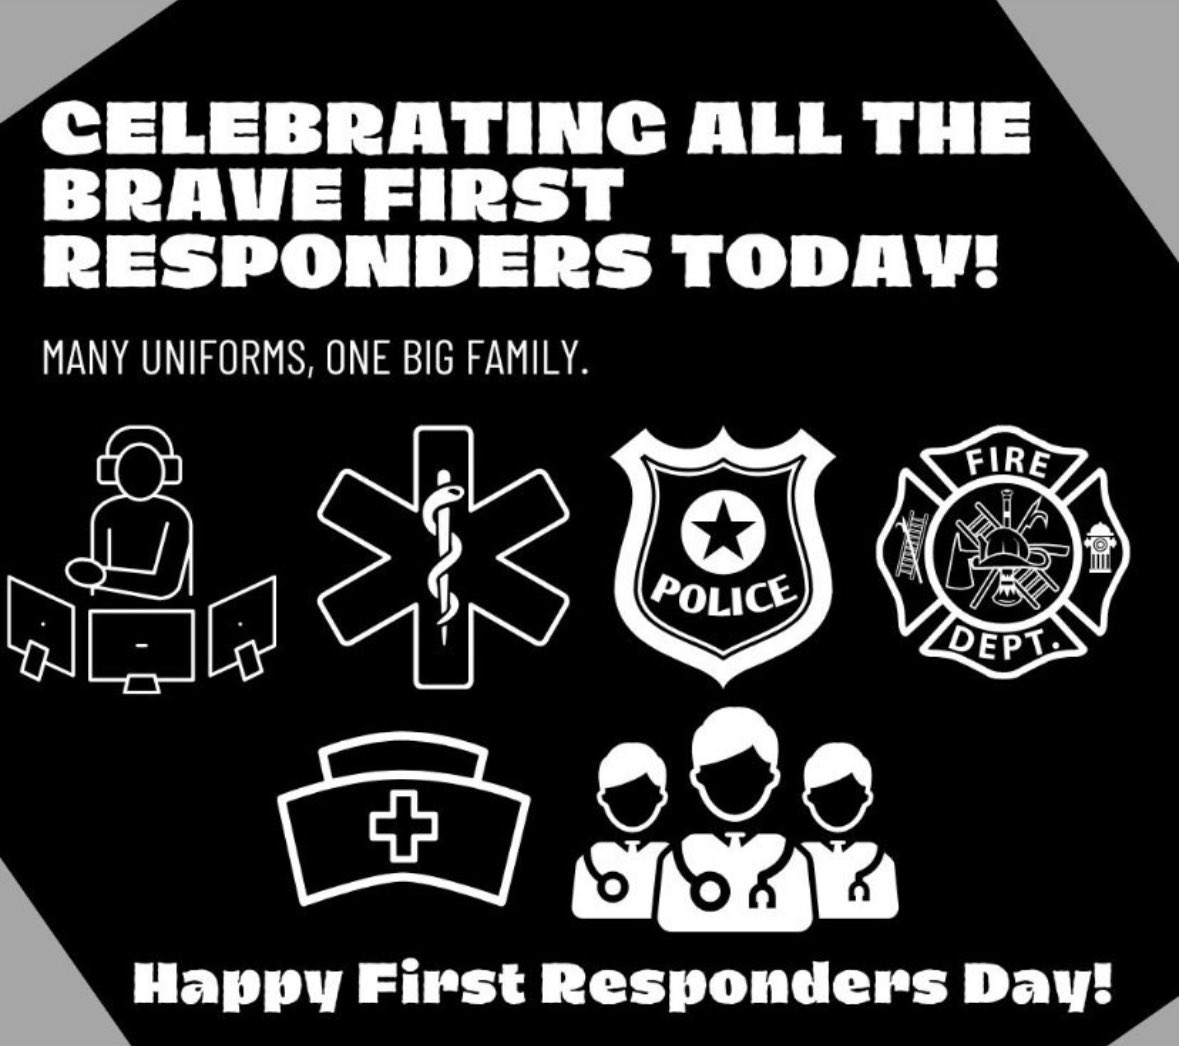 Happy 1st Responders Day! To all of our community partners. @HaltonPolice @HaltonMedics207